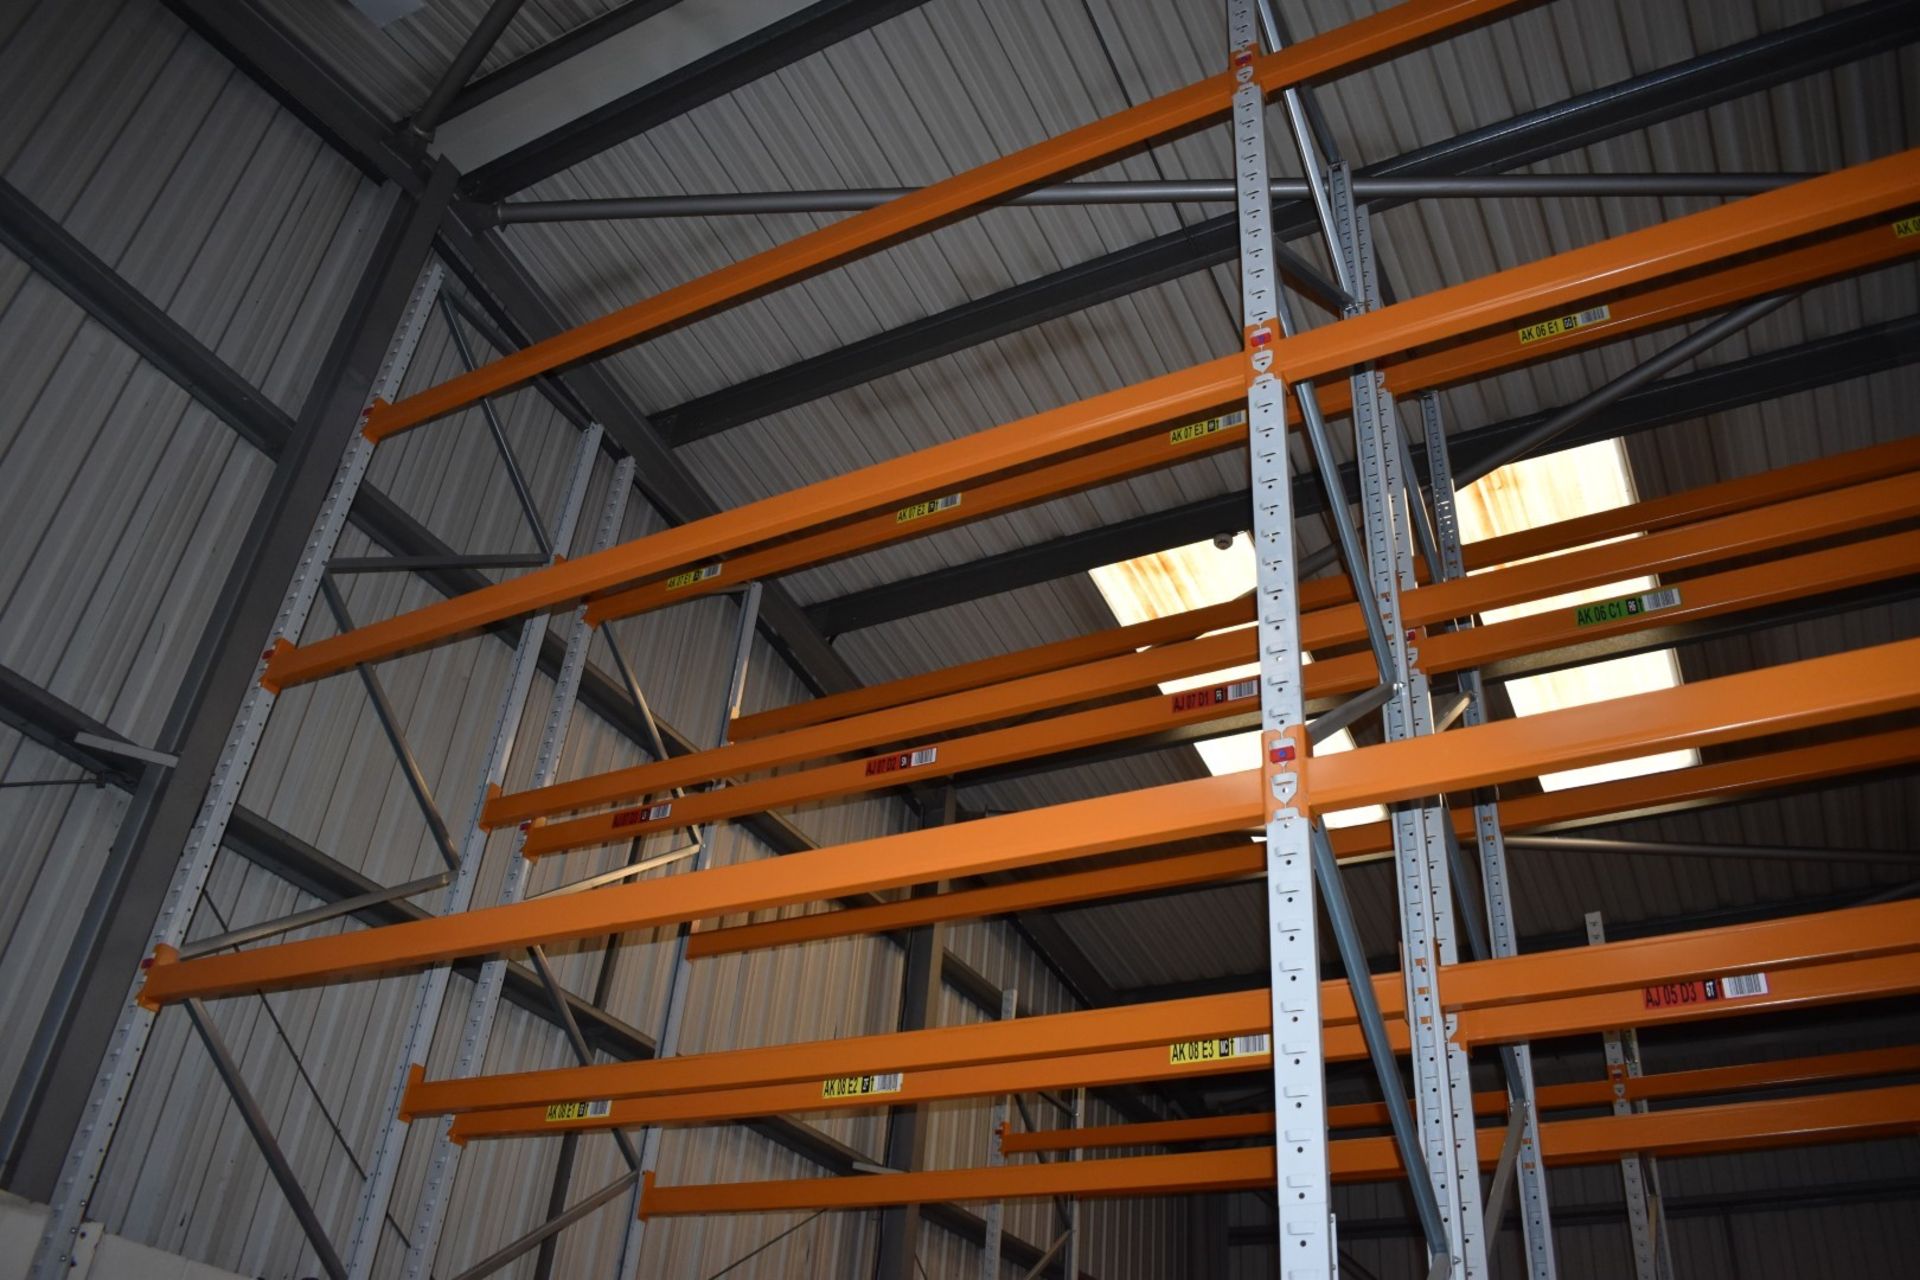 9 x Bays of Apex Pallet Racking - Includes 10 x Apex 16 UK 16,000kg Capacity Uprights and 60 x - Image 6 of 19